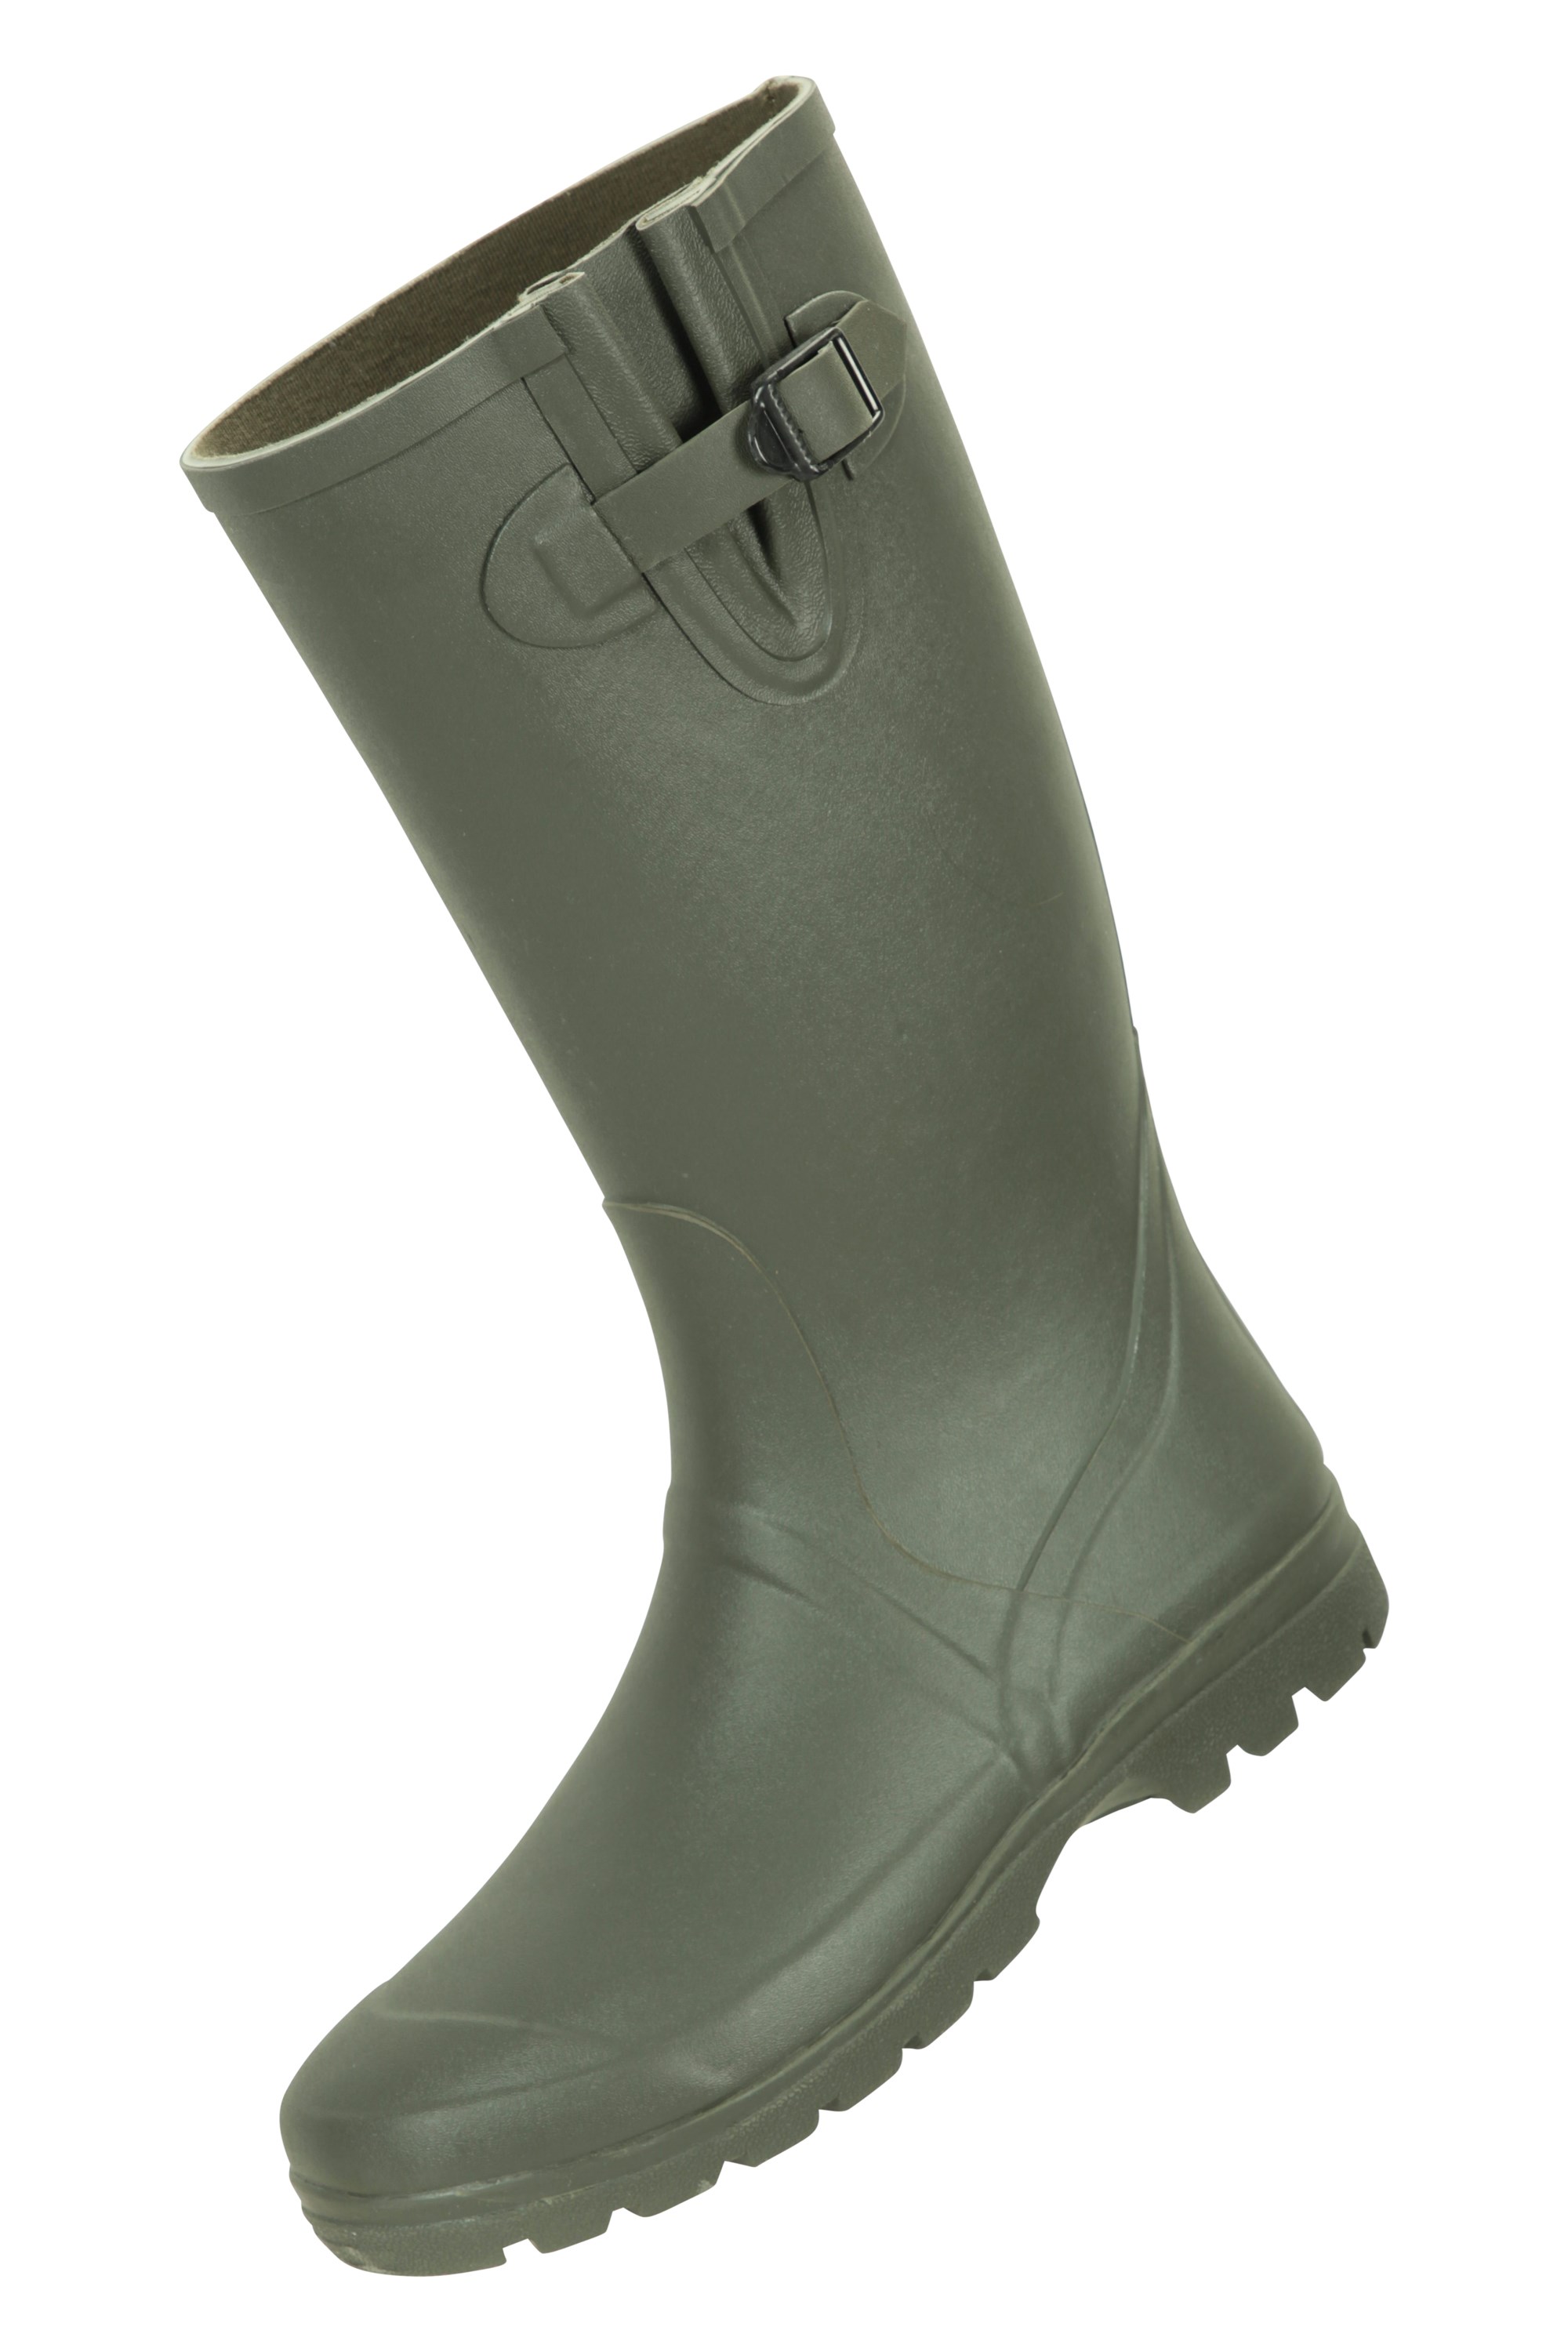 Mountain Warehouse Mens Wellies Cotton Lined Wellington Boots Waterproof Wellys 